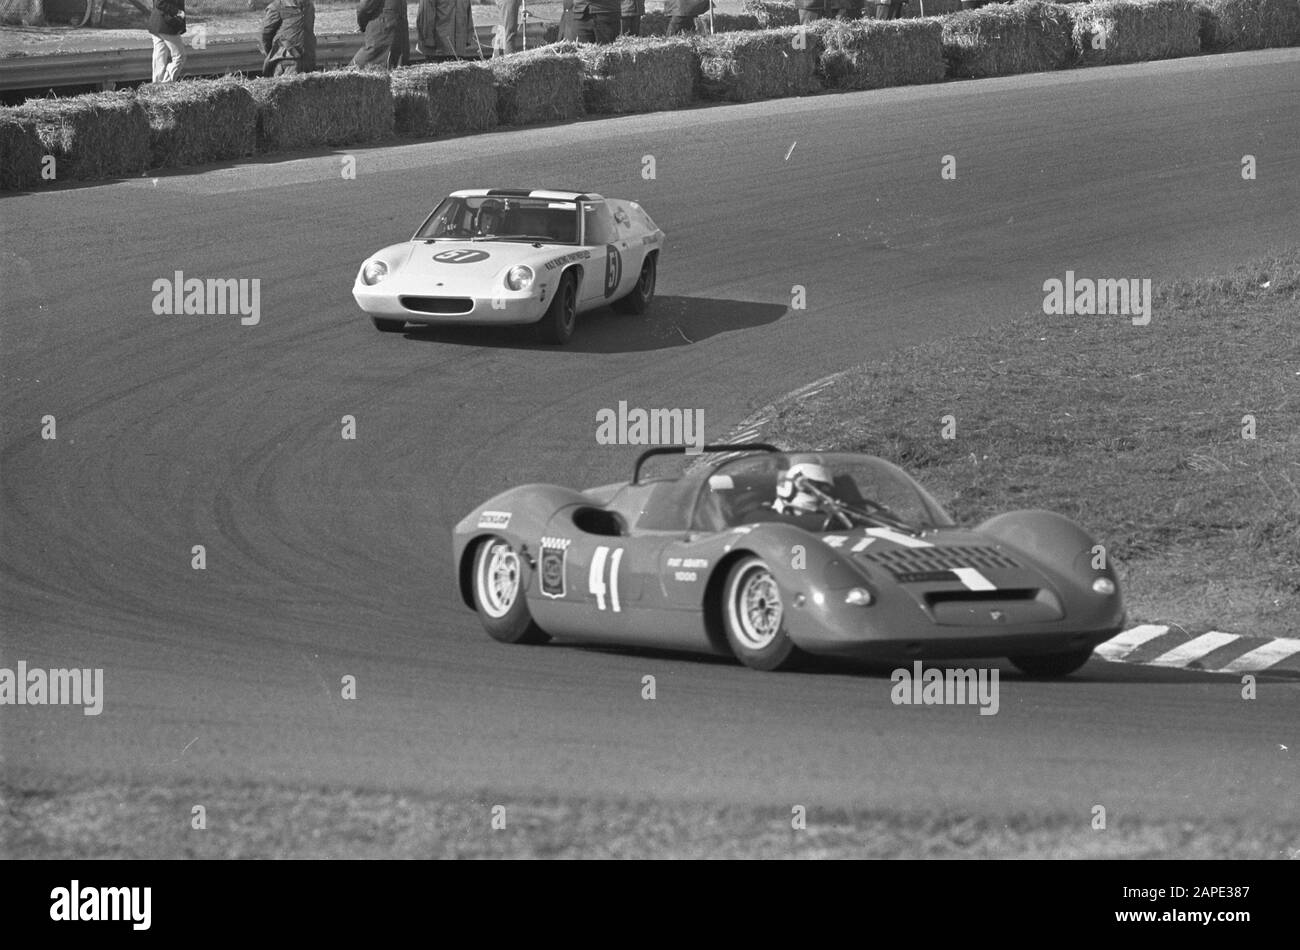 Car races on Zandvoort. Touring cars above 1000cc. Issue 51 T. Kinsbergen (Lotus 47) and Ed H. Swart, number 41 Fiat Abarth 1000 Date: 7 april 1968 Location: Noord-Holland, Zandvoort Keywords: motorsport, sport Person name: T. Kinsbergen Stock Photo